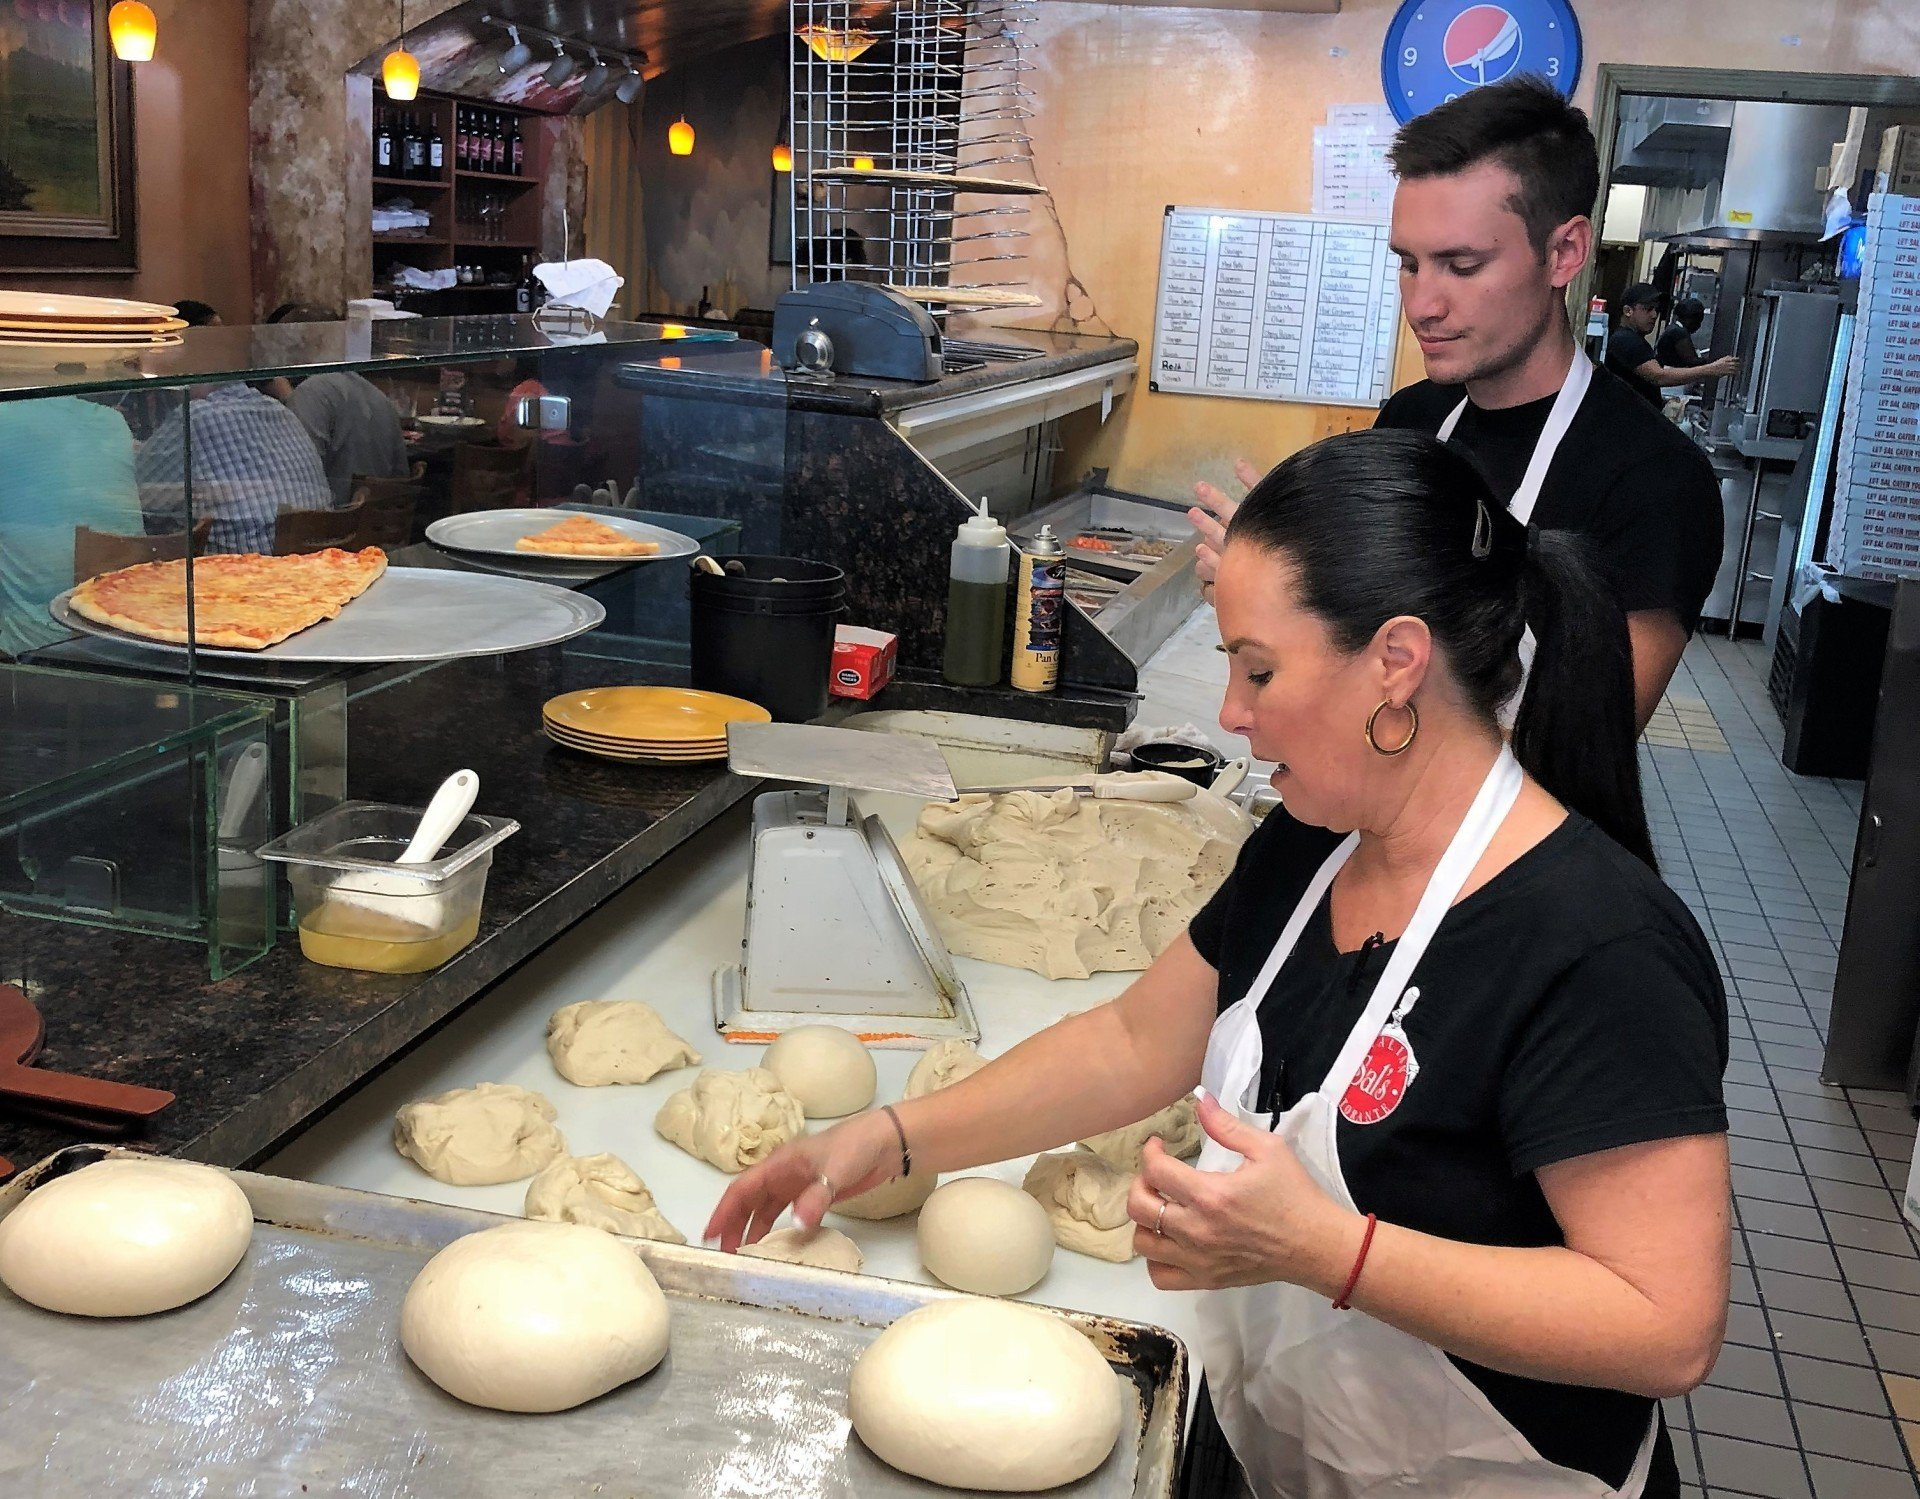 Workers making pizza dough